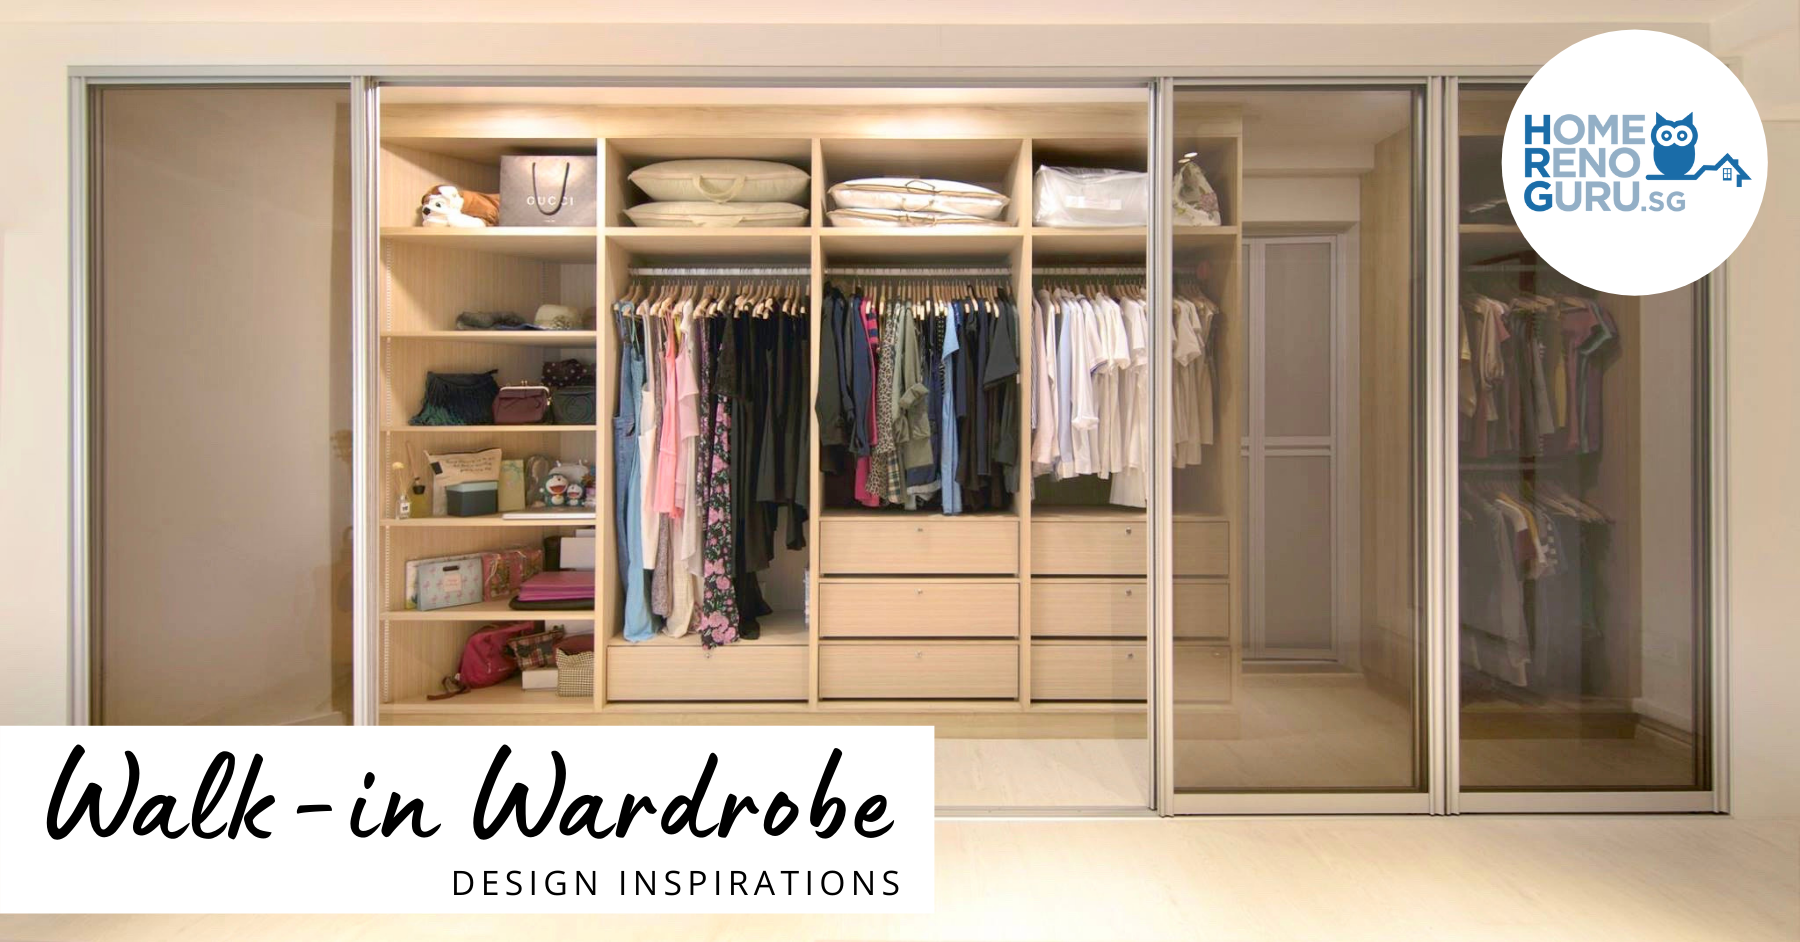 13 Walk-in Wardrobe Design Inspirations for Your Home